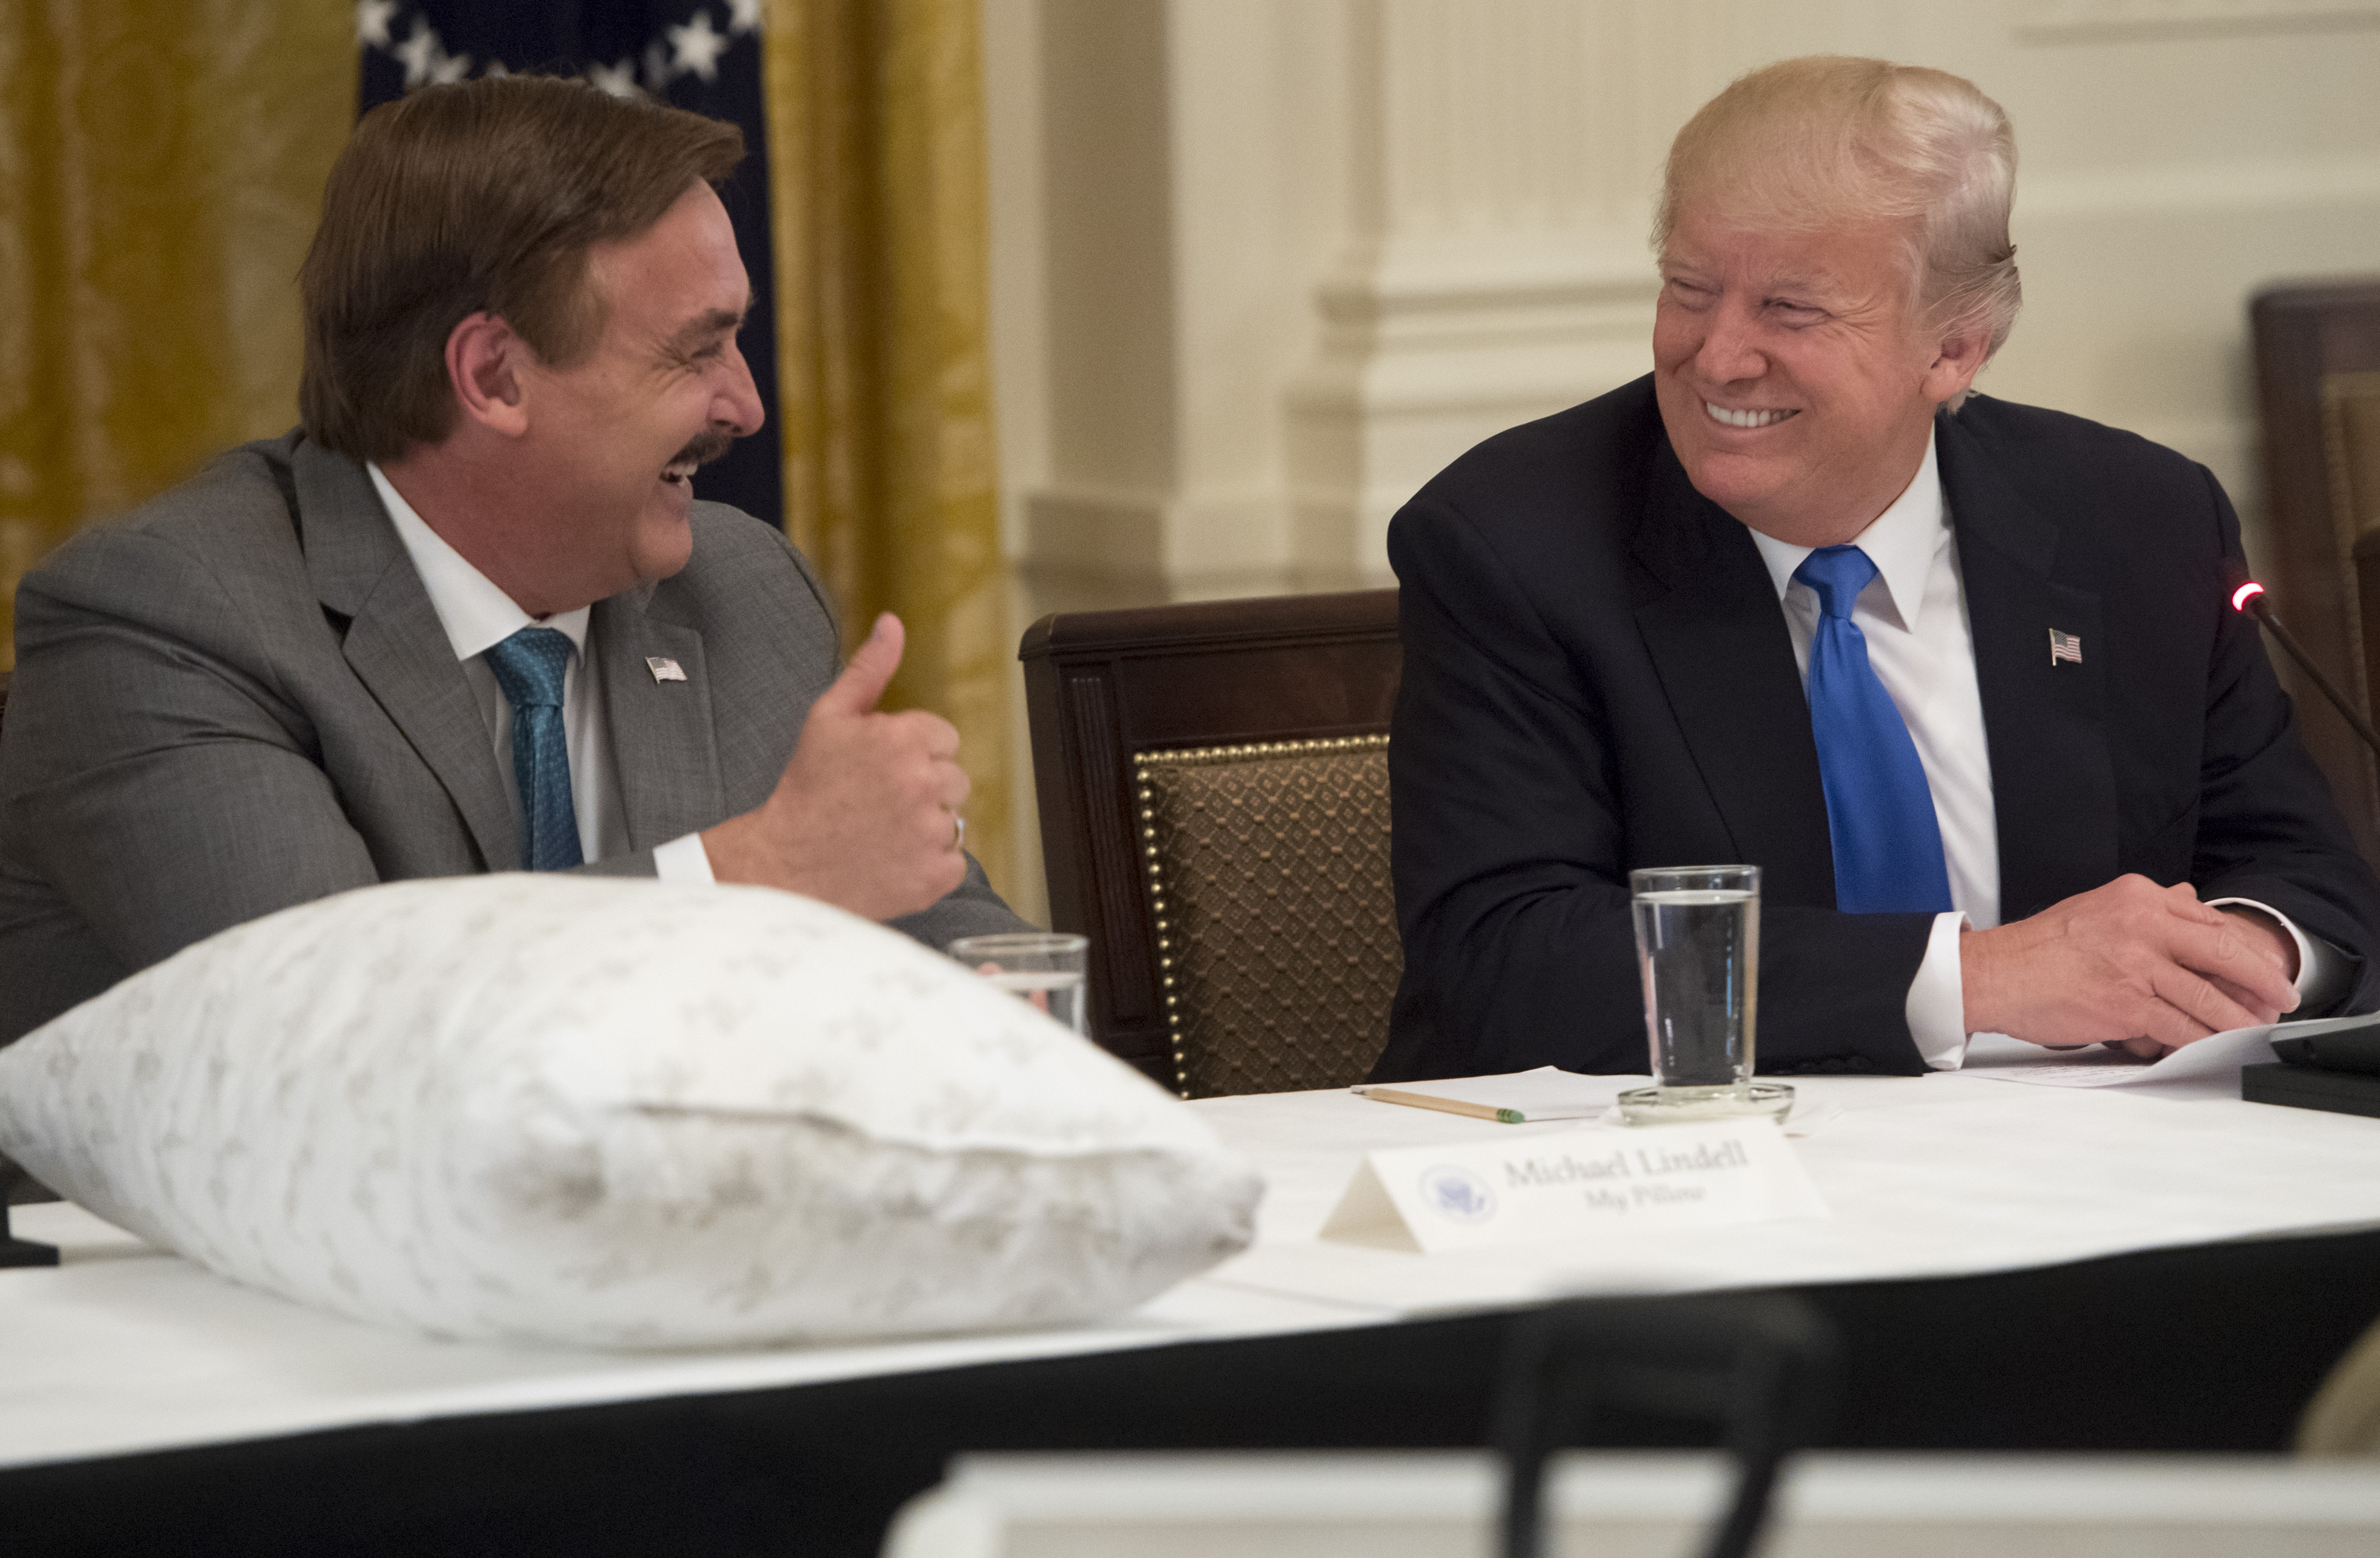 Mypillow Ceo Mike Lindell Sued By Dominion Voting Systems For 1 3 Billion